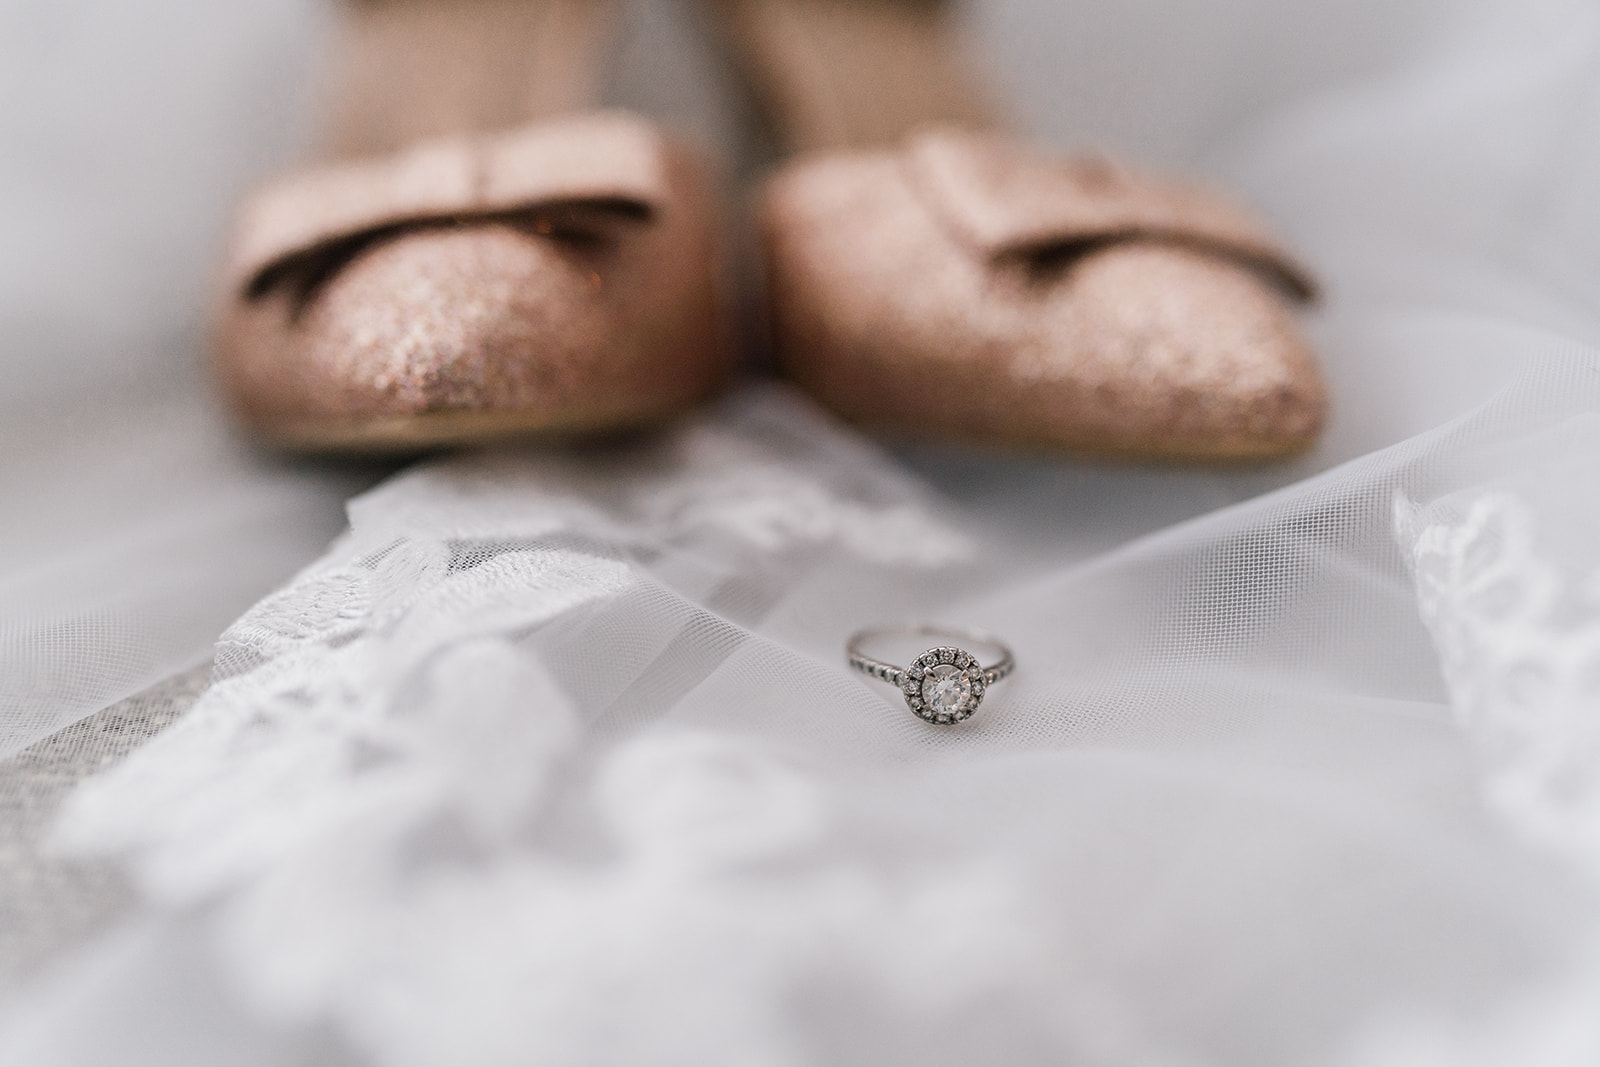 Wedding ring in front of wedding shoes